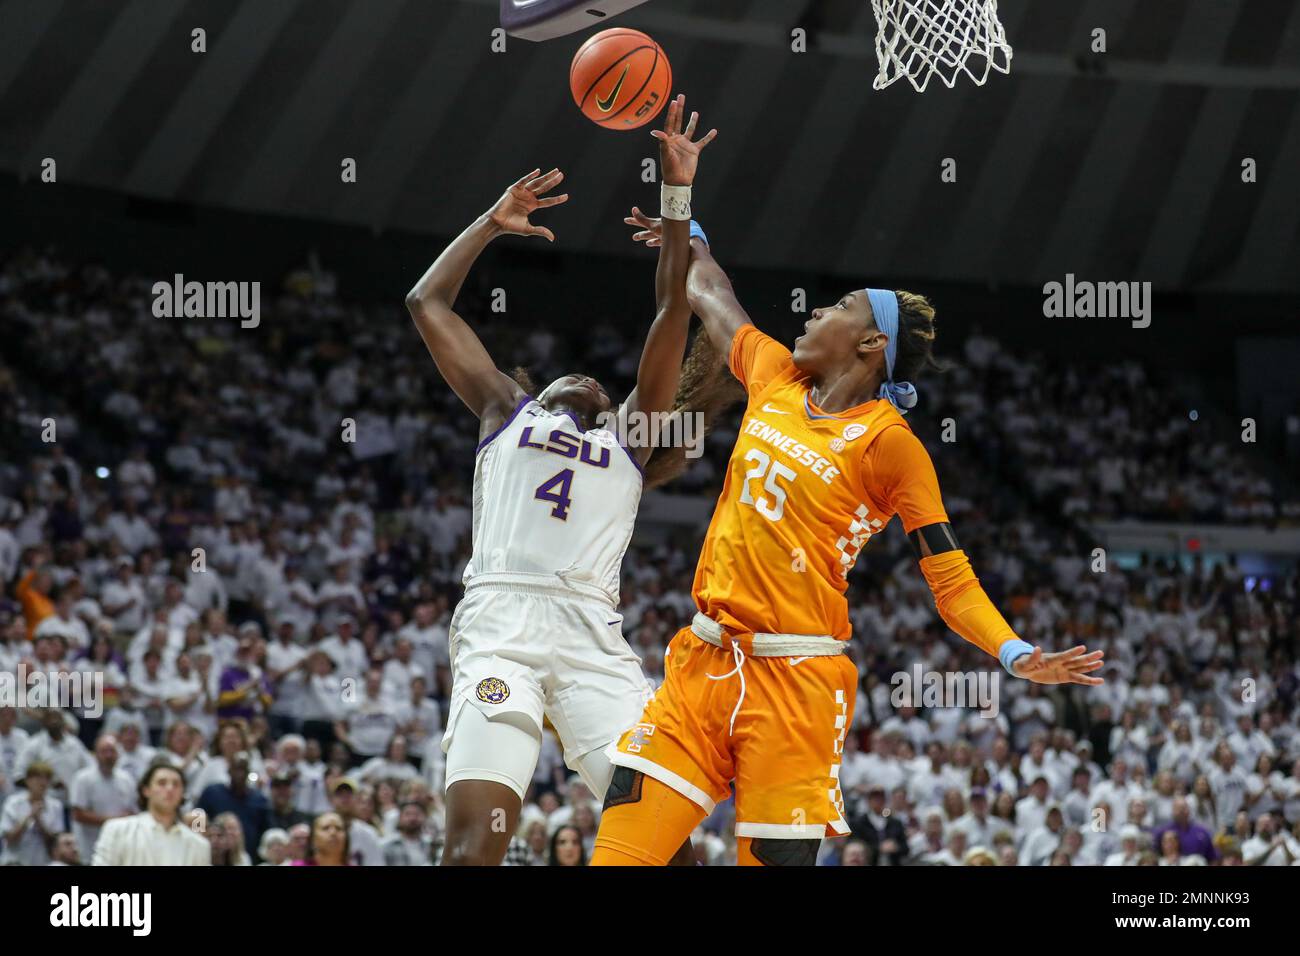 Baton Rouge, LA, USA. 30th Jan, 2023. Tennessee's Jordan Horston (25) fouls LSU's Flau'jae Johnson (4) on her way to the basket during NCAA Women's Basketball action between the Tennessee Volunteers and the LSU Tigers at the Pete Maravich Assembly Center in Baton Rouge, LA. Jonathan Mailhes/CSM/Alamy Live News Stock Photo